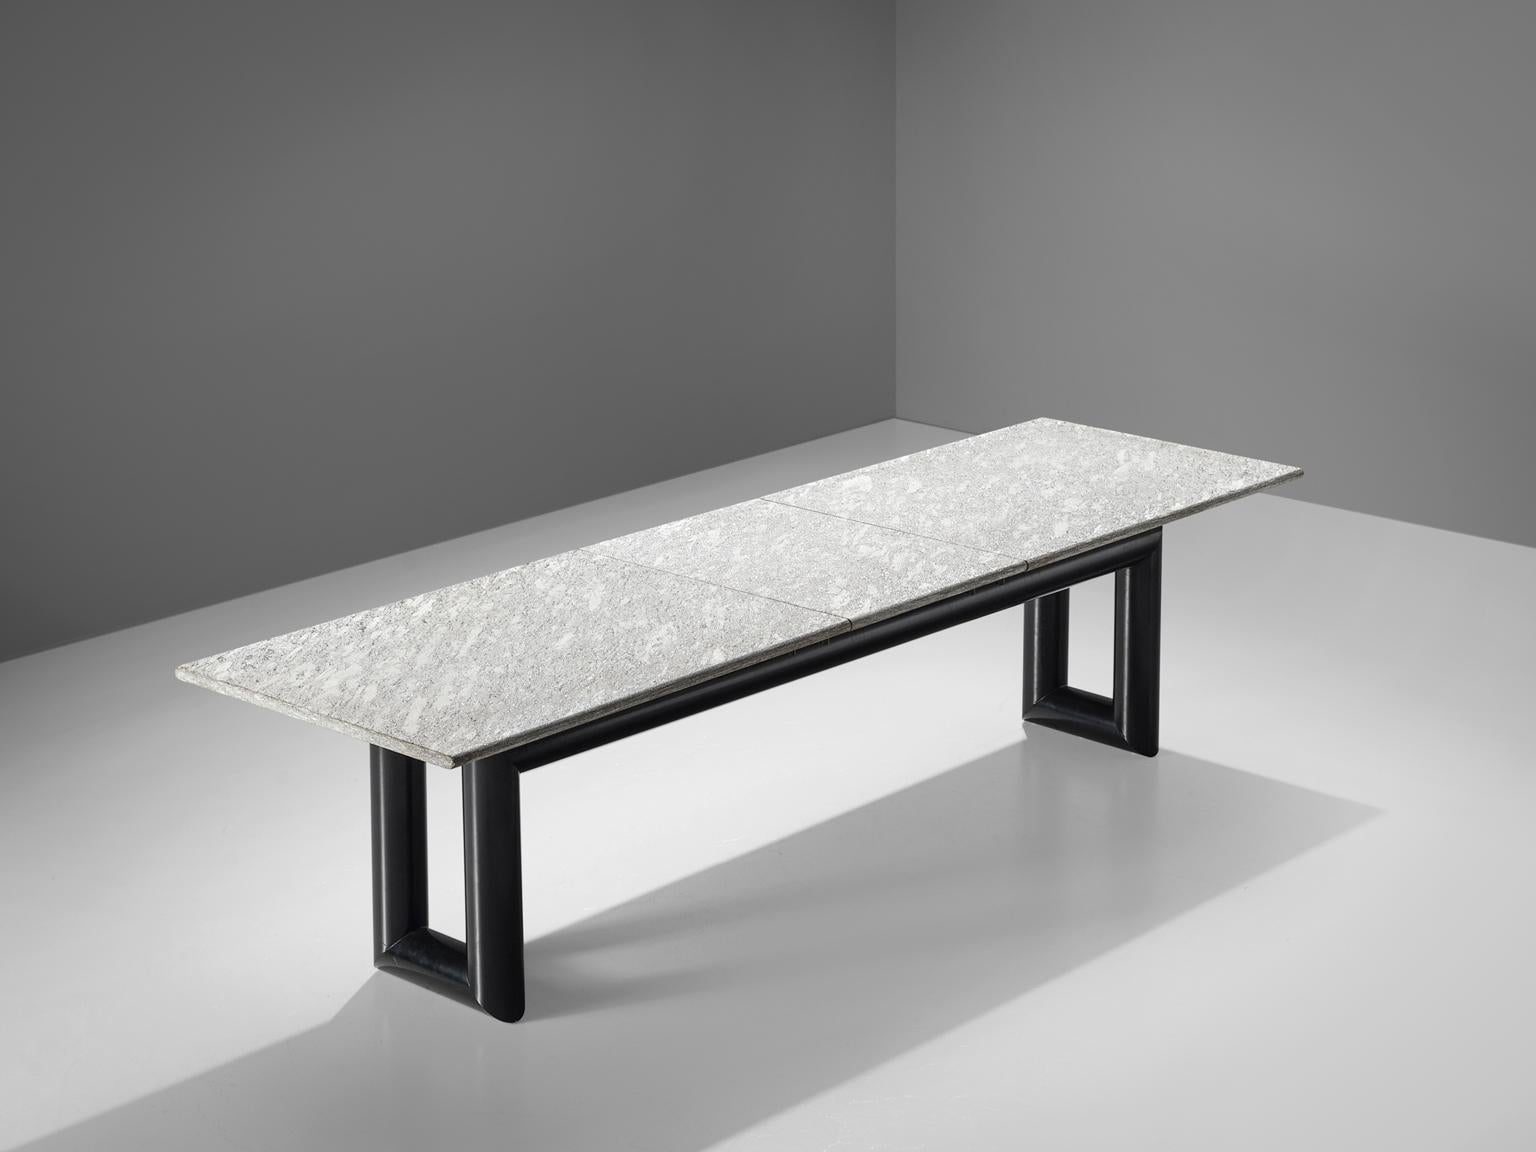 Mario Botta for Alias, conference table, metal and stone, Italy, 1983.

This sturdy table features two u shaped thick metal legs and a large, solid grey marble top. The metal base is painted black and forms a wonderful contrast with the long